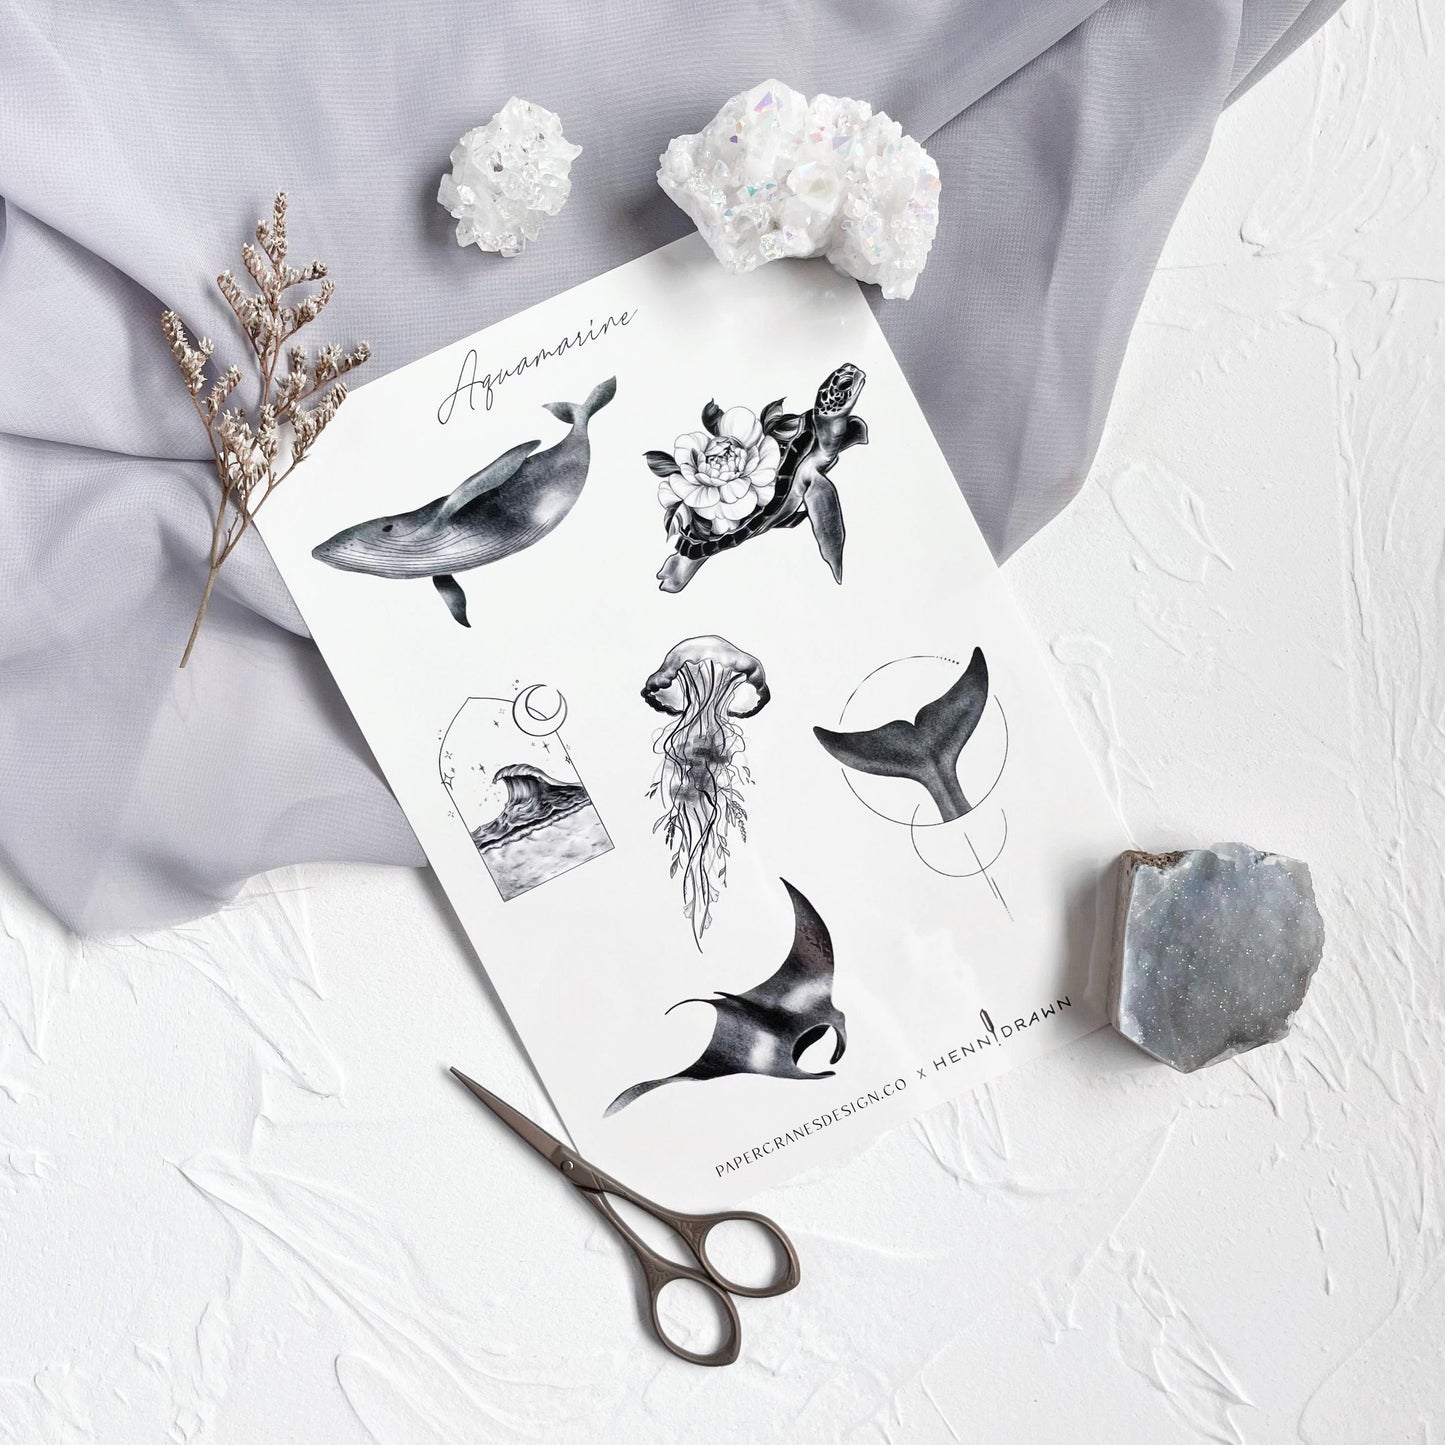 Temporary Tattoo Sheets - Set of 2 (UP. $28)